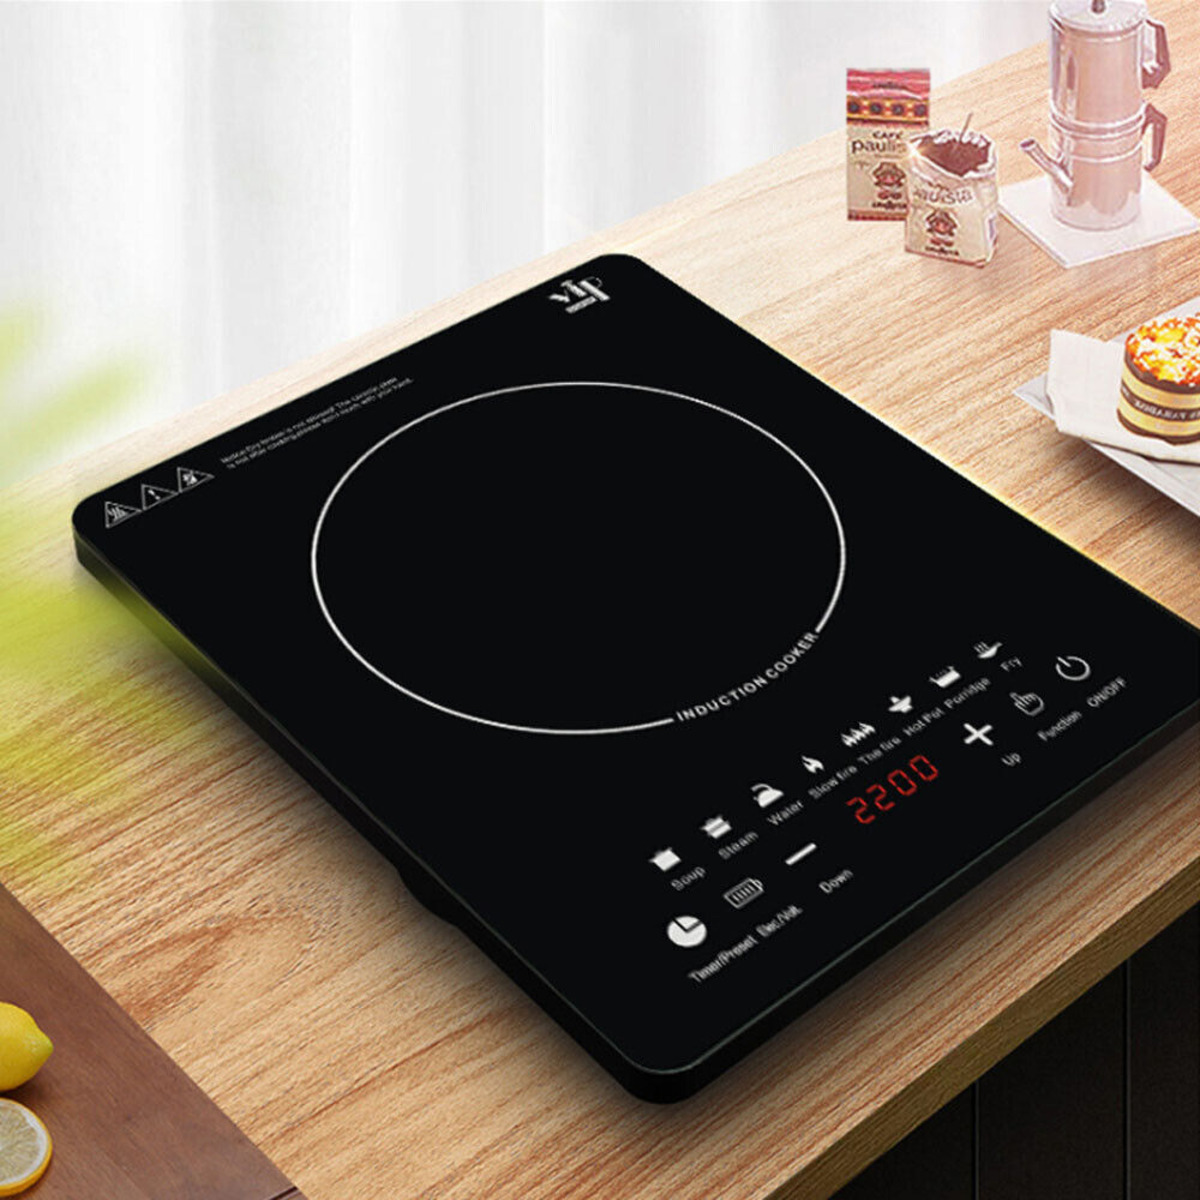  ECOTOUCH Induction Cooktop 2 Burner 12 inch with